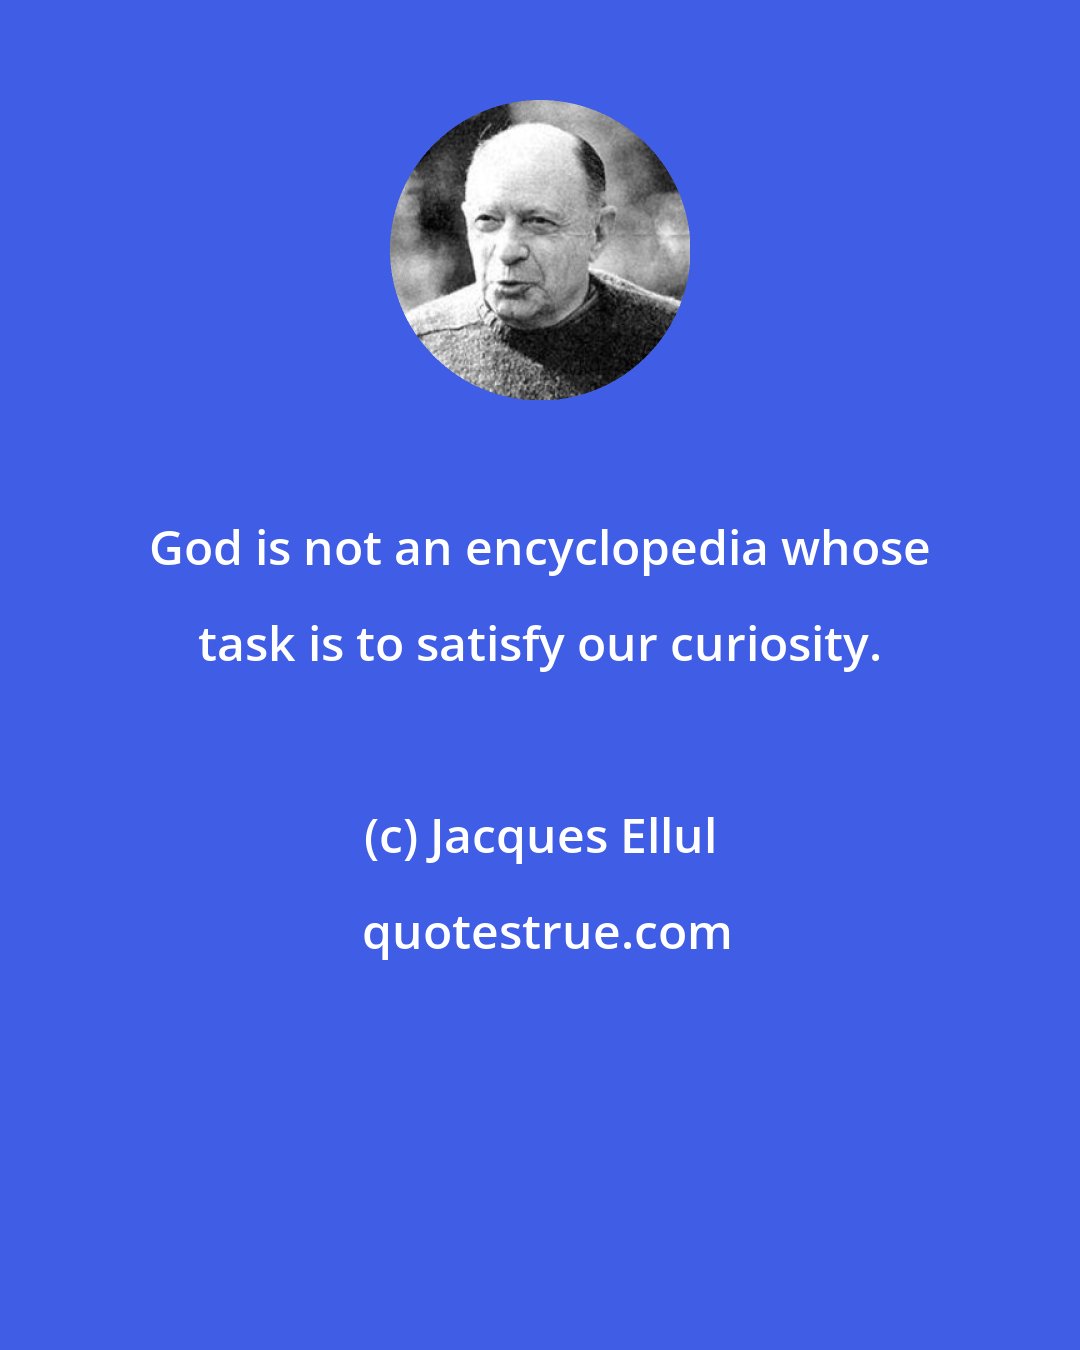 Jacques Ellul: God is not an encyclopedia whose task is to satisfy our curiosity.